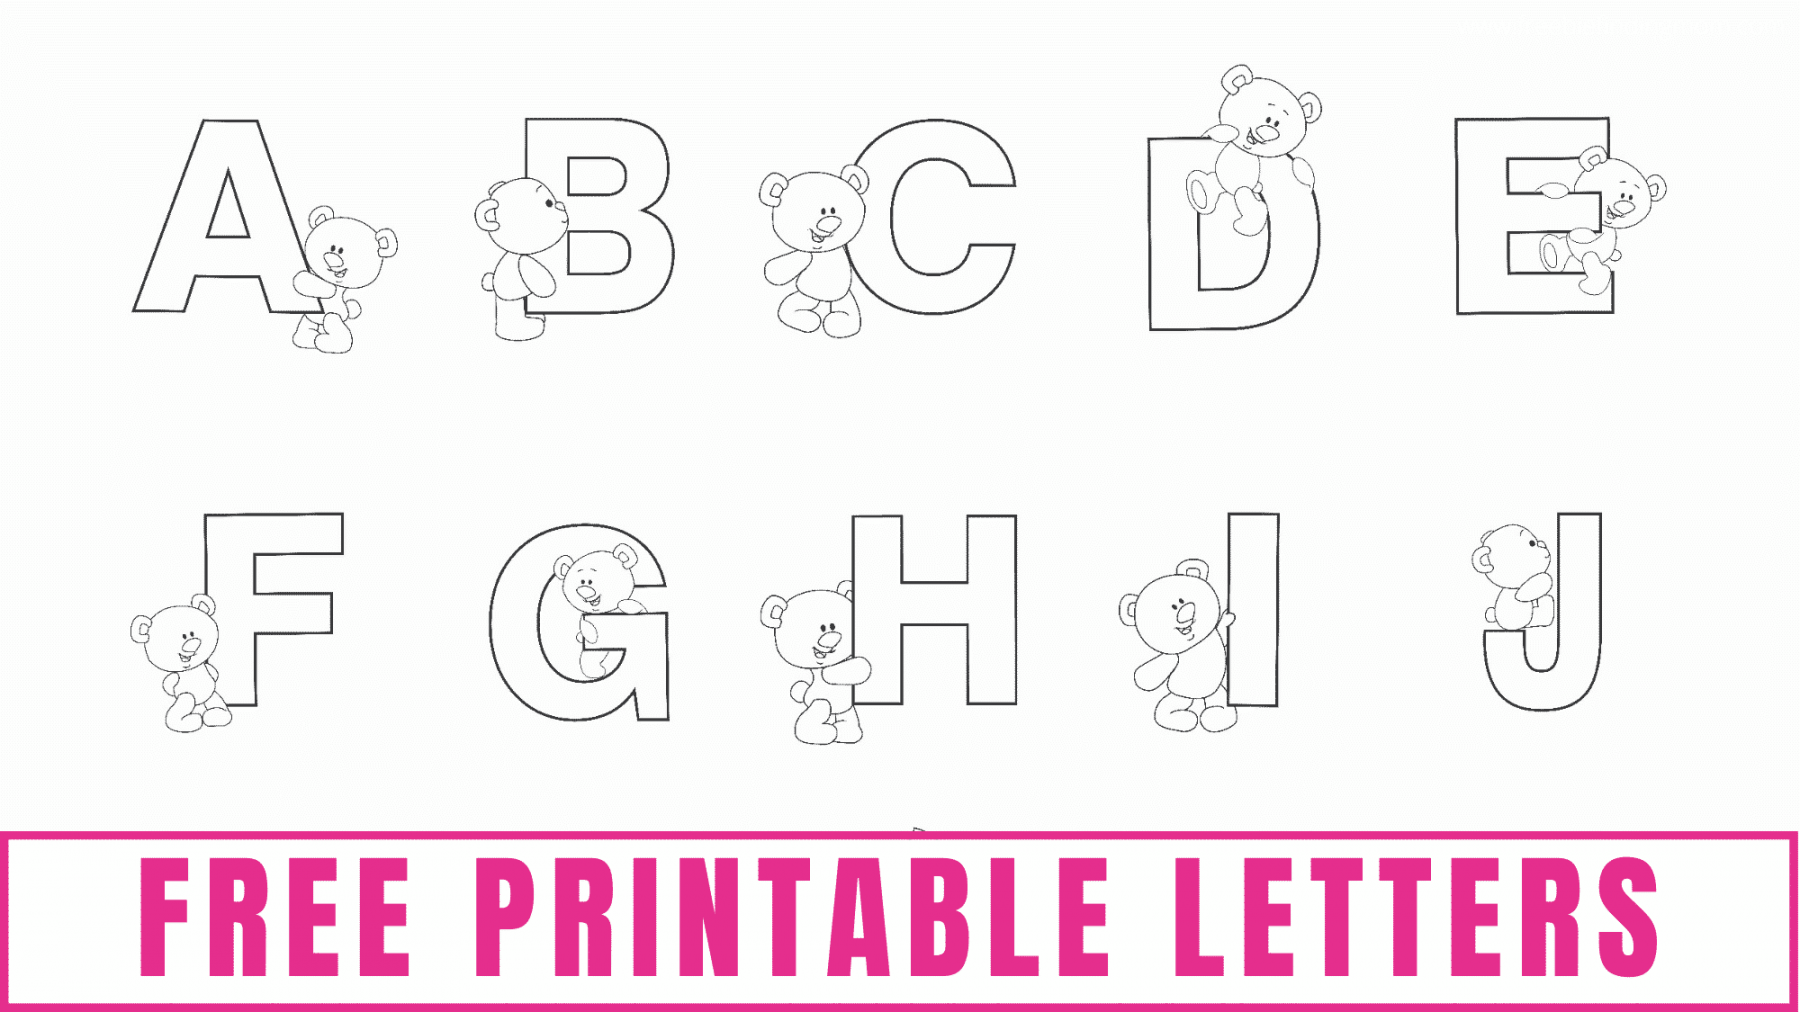 Free Printable Letters and Alphabet Letters - Freebie Finding Mom